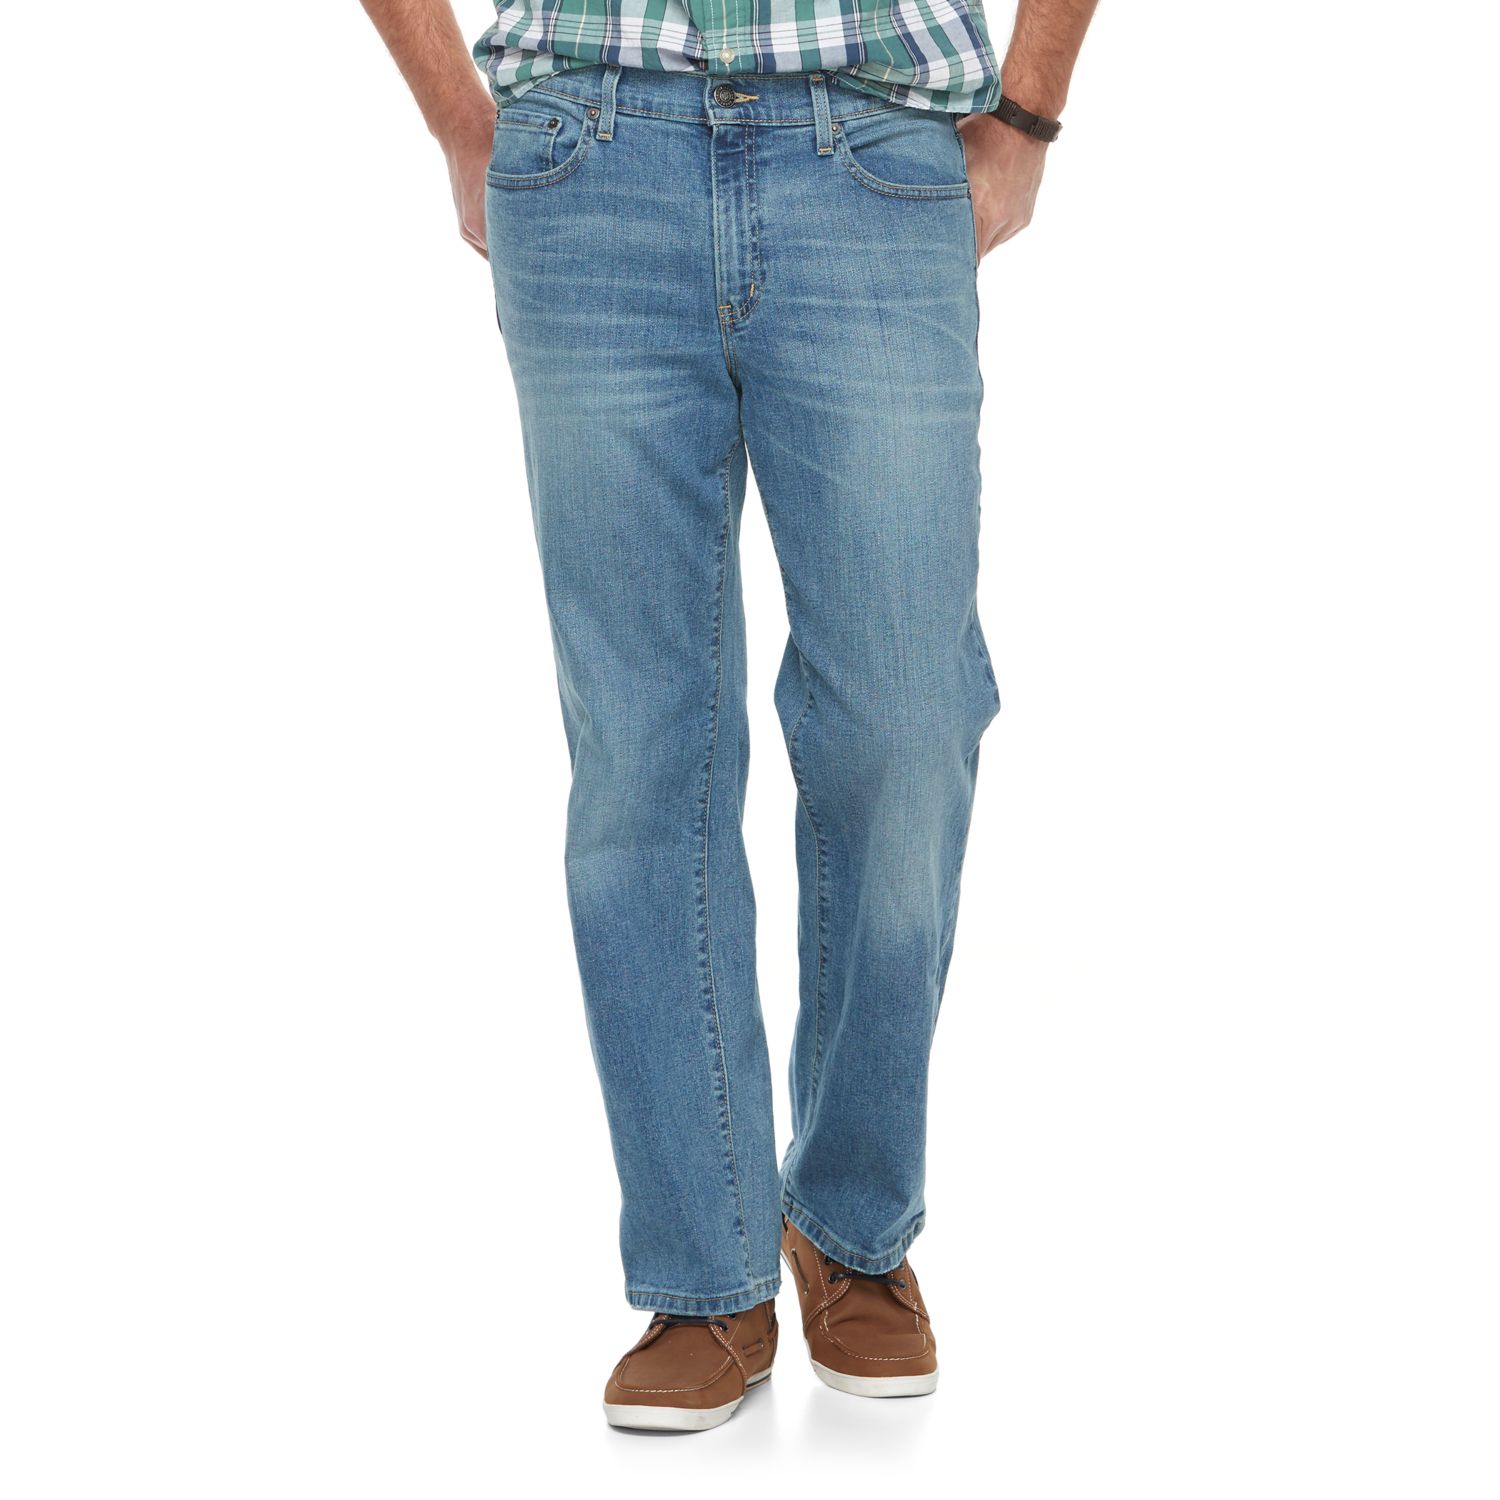 izod men's big & tall comfort stretch relaxed fit jean